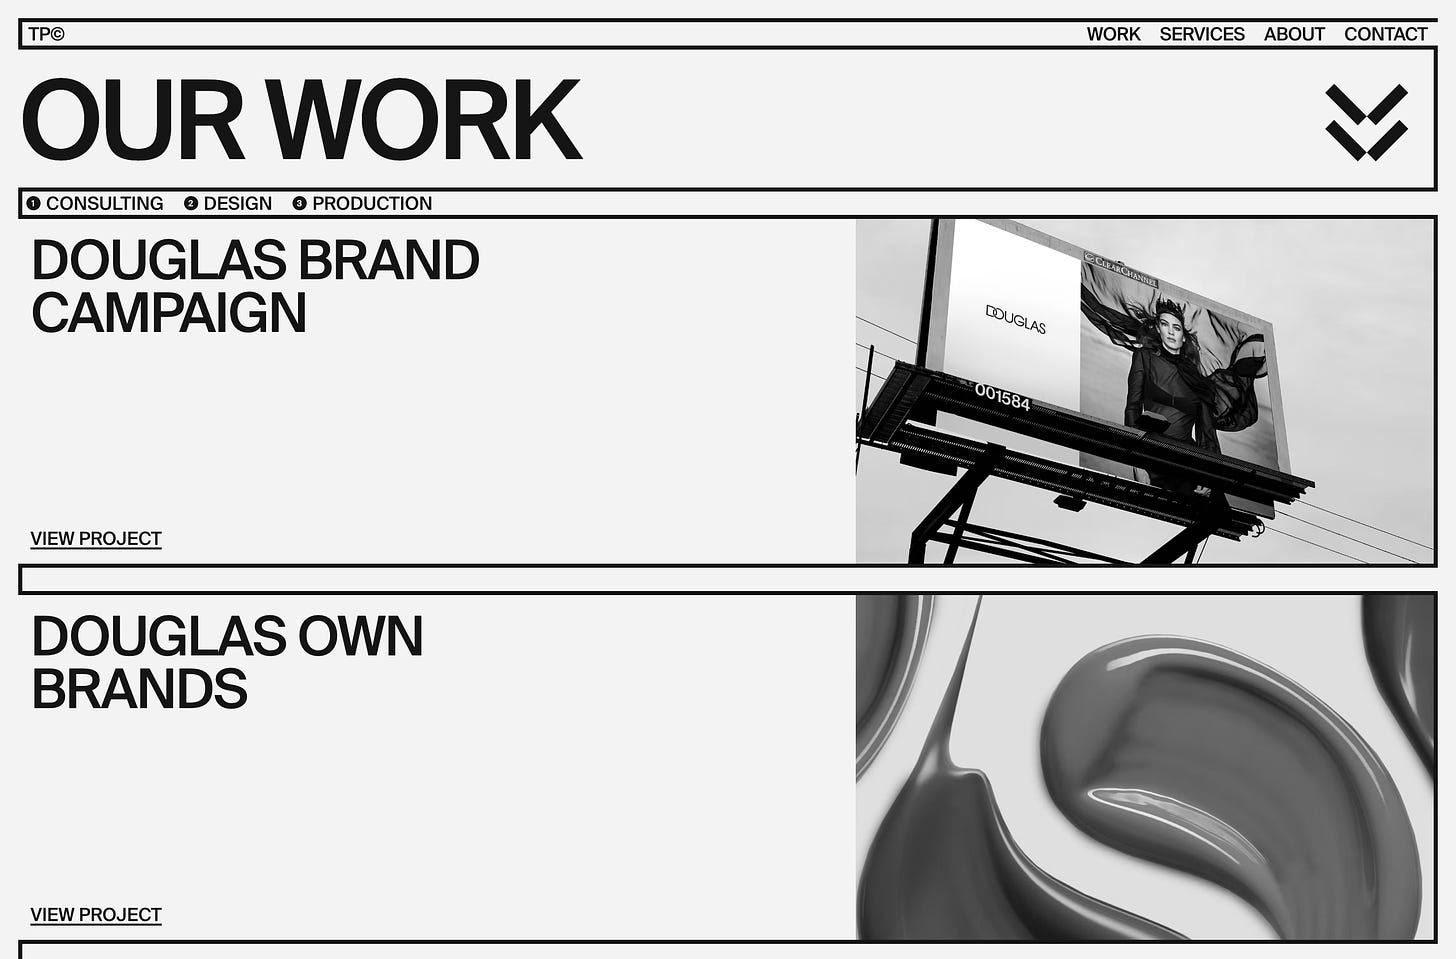 The work page from Traffic.productions website.